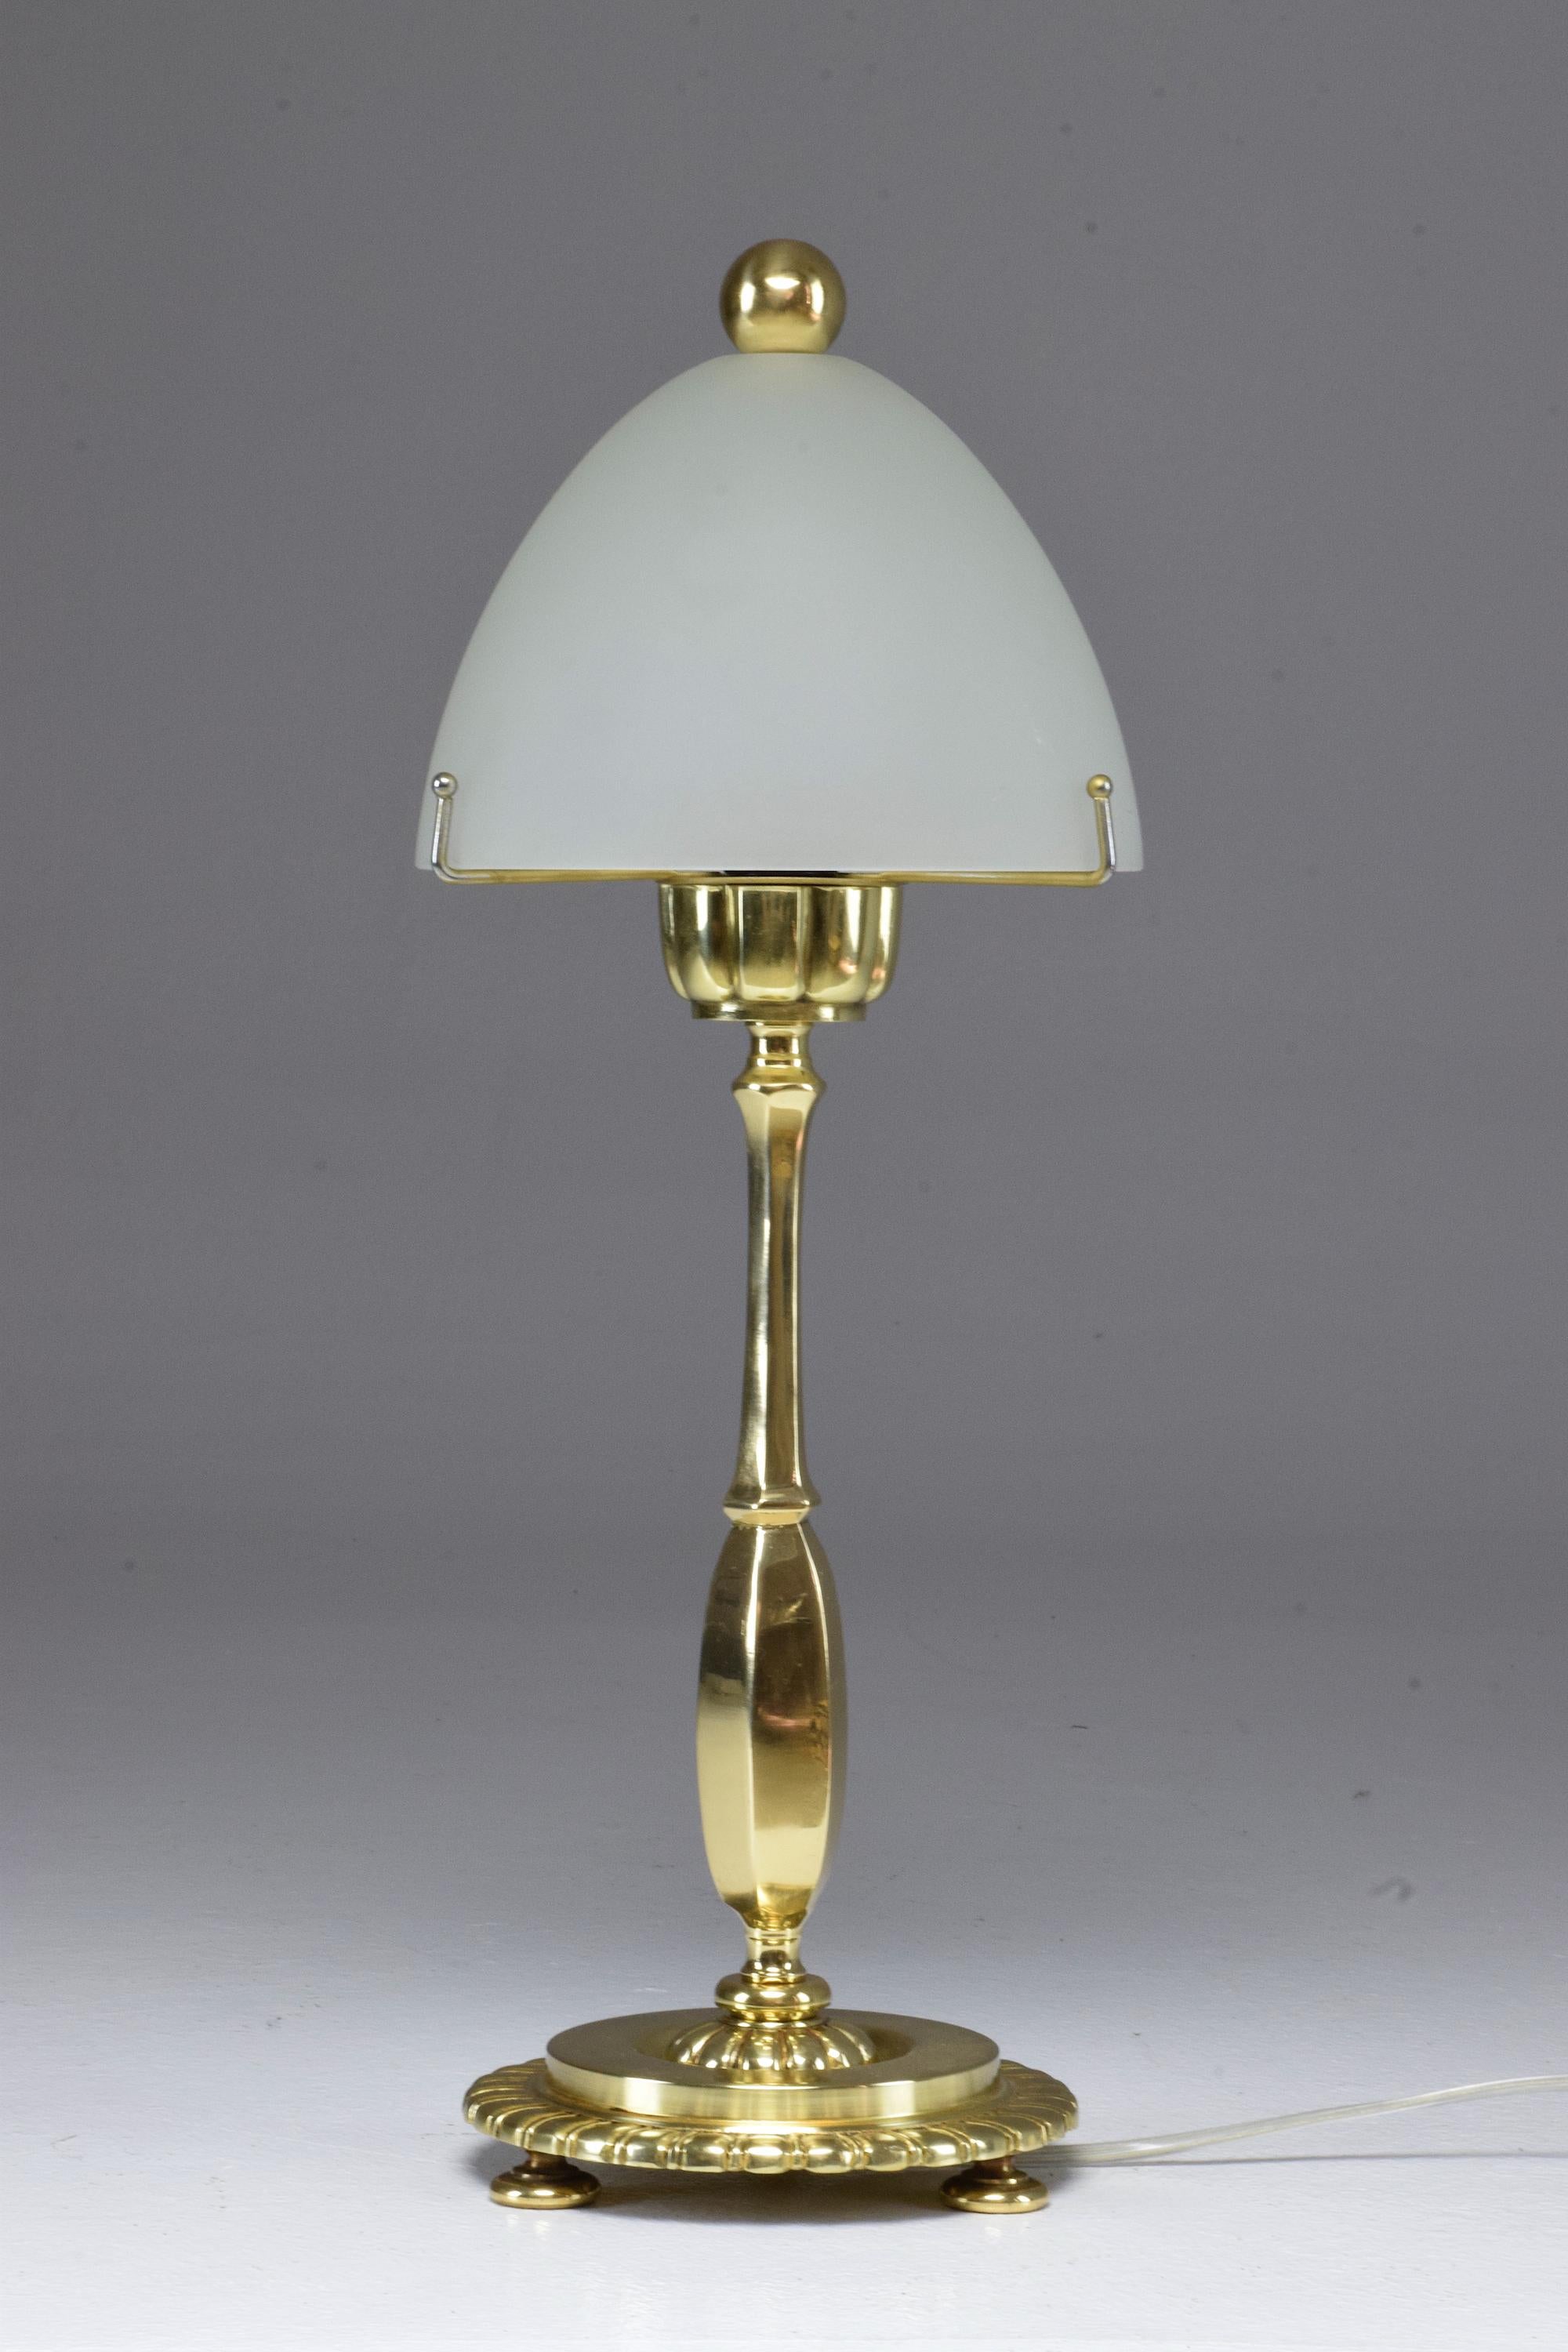 A 20th century vintage French table lamp by Henry Petitot circa 1930s cast in solid bronze and original molded opaque glass.
Signed at the base.

----
We are an exhibition space and an online destination established by Jonathan Amar Studio. All our